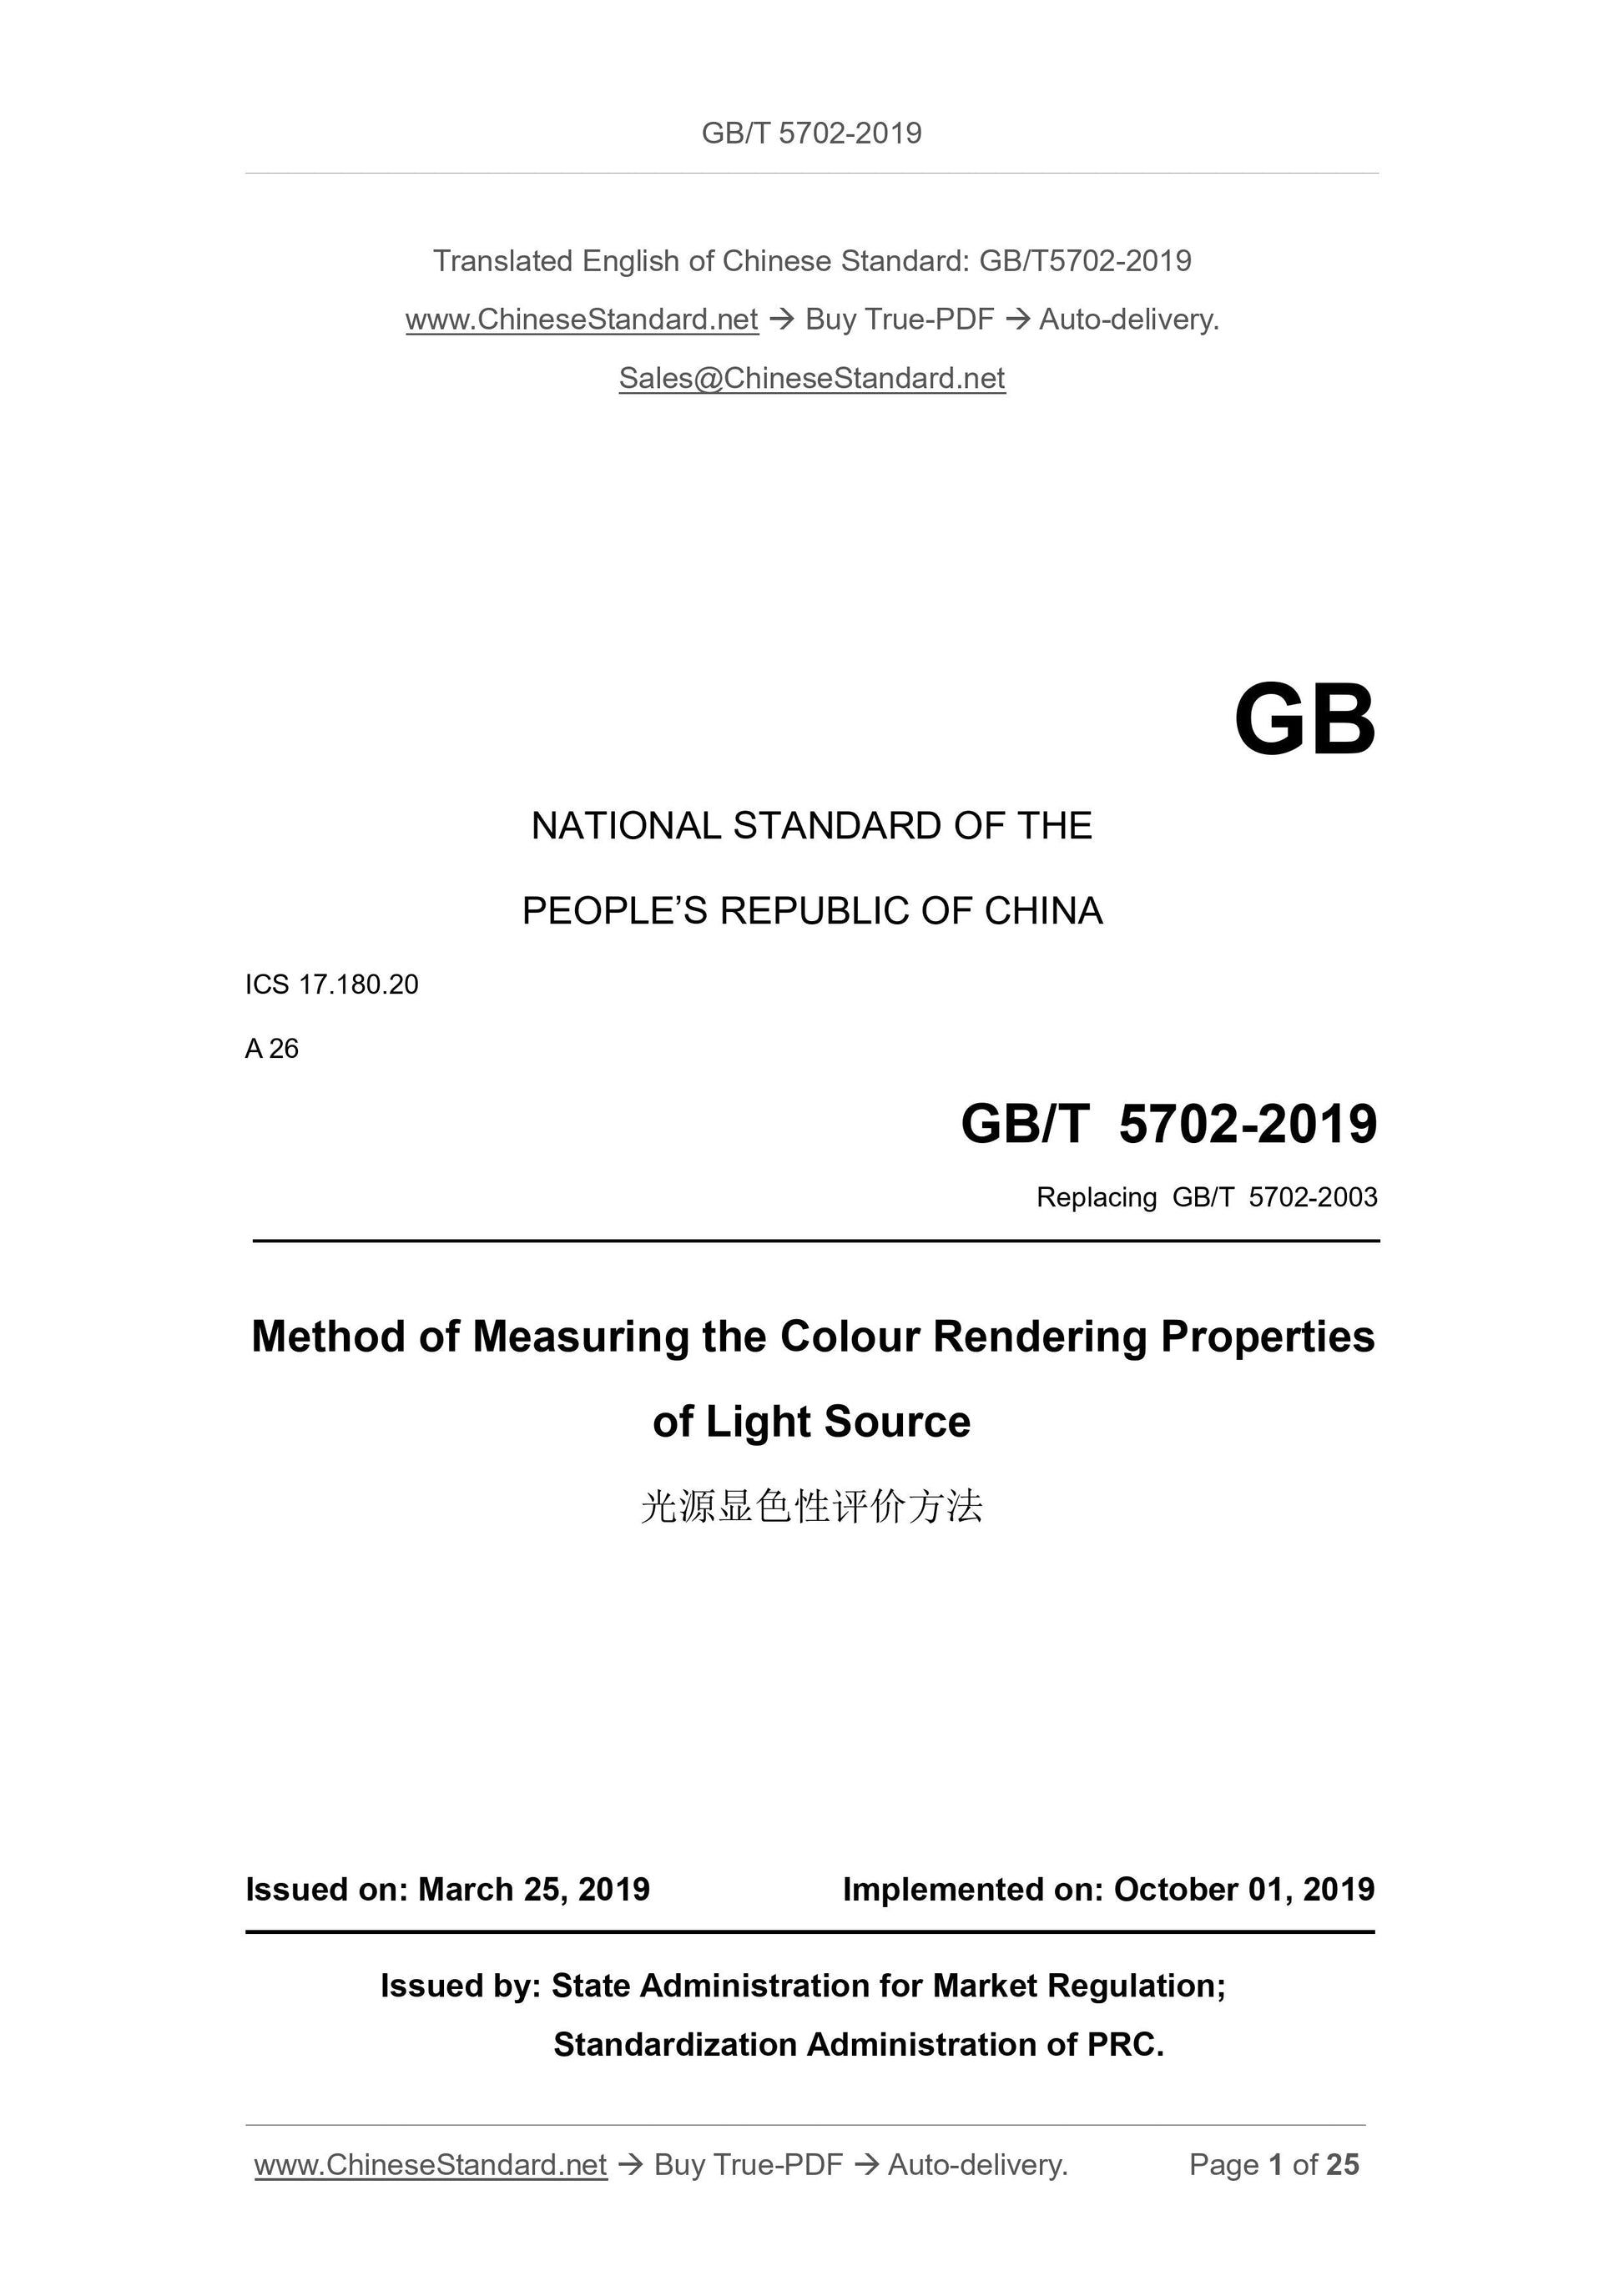 GB/T 5702-2019 Page 1